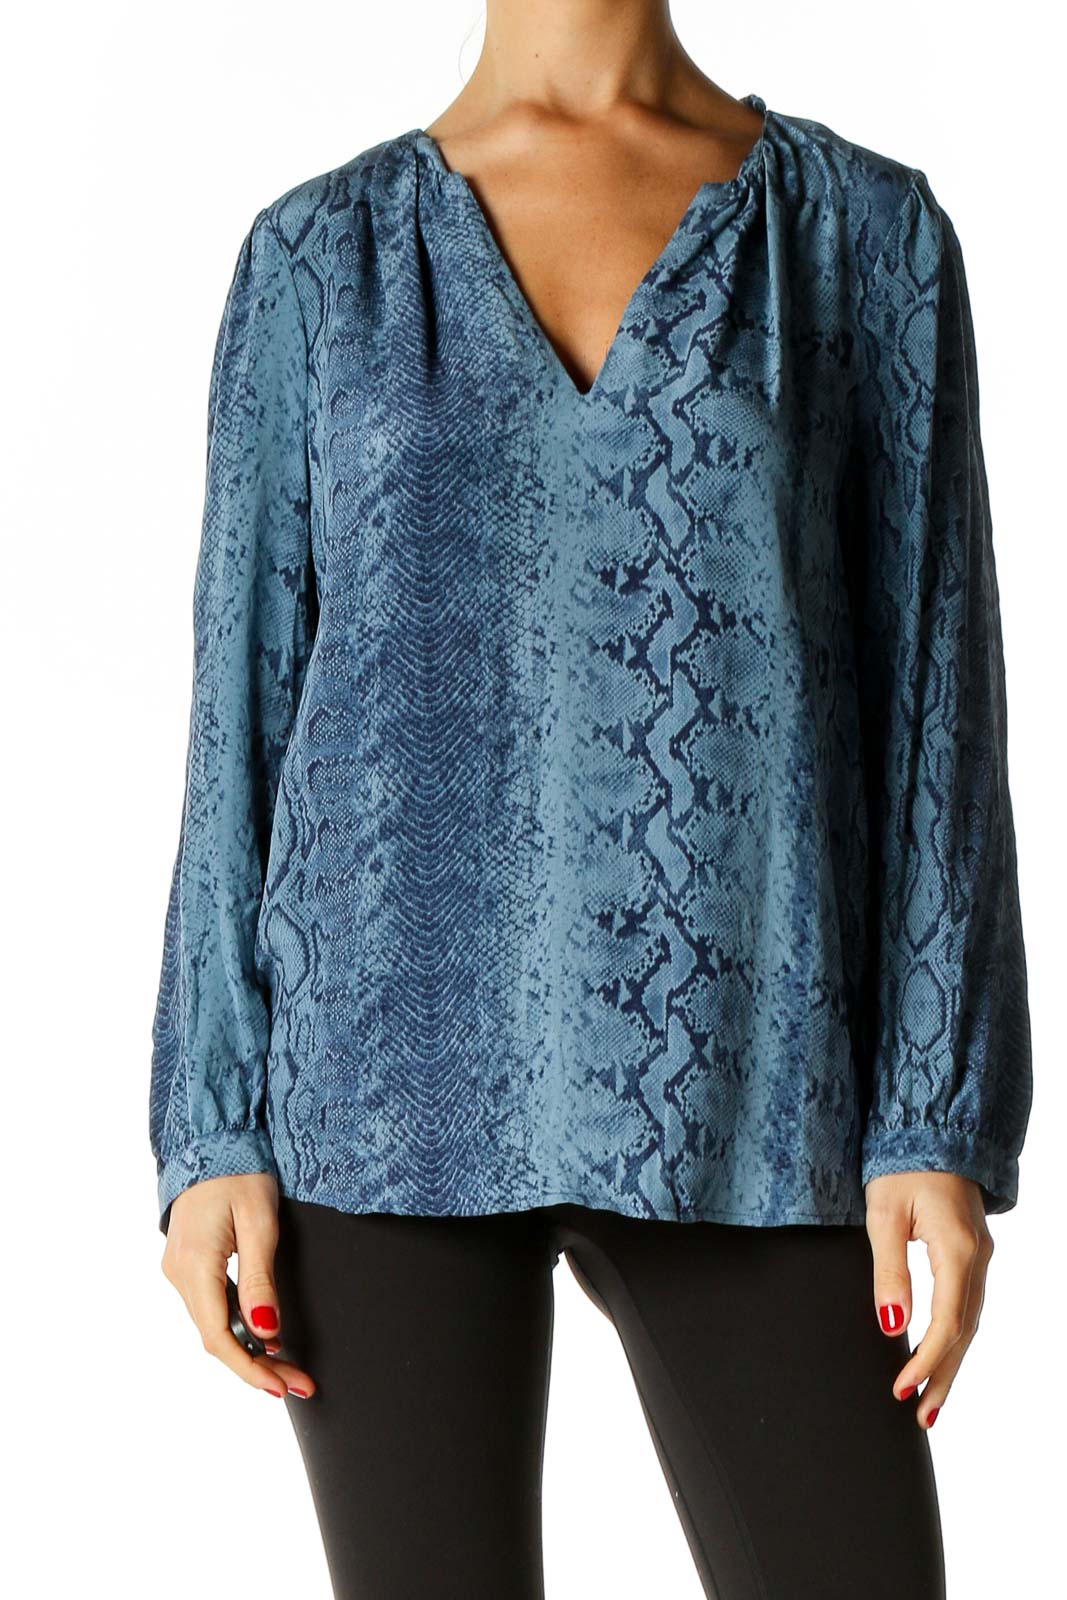 Blue Animal Print Chic Blouse Front